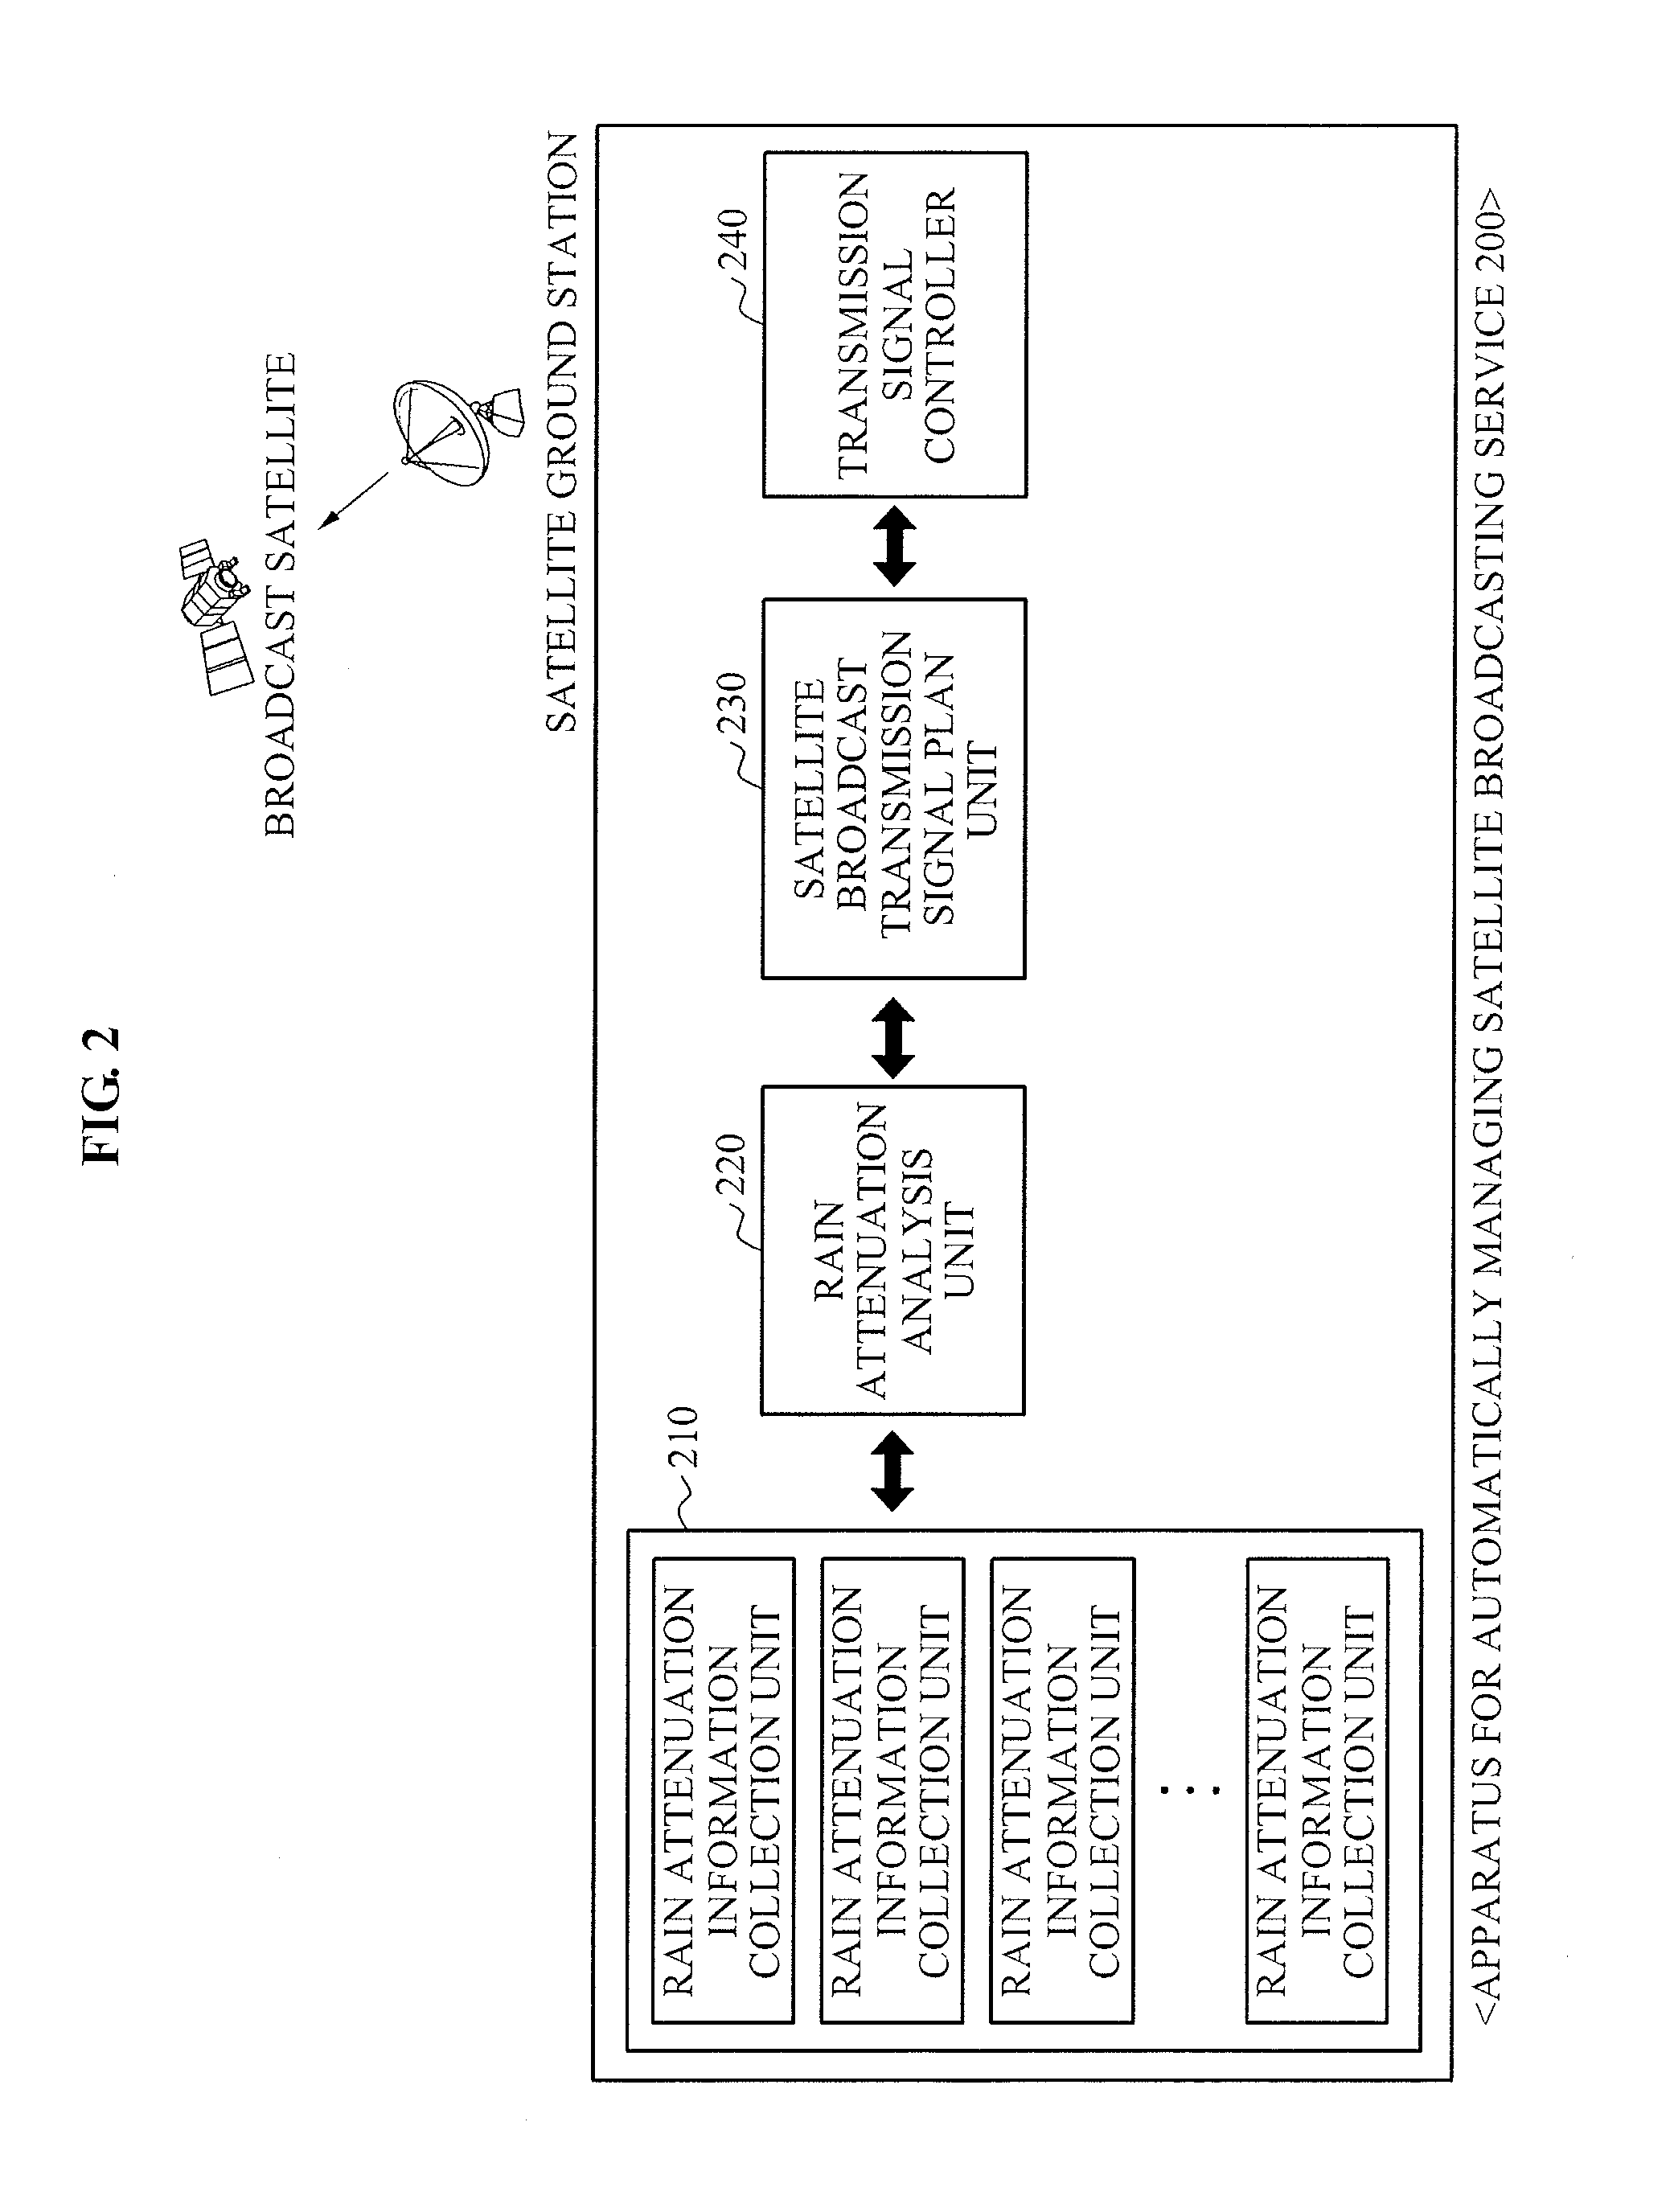 Apparatus and method of automatically managing satellite broadcasting service